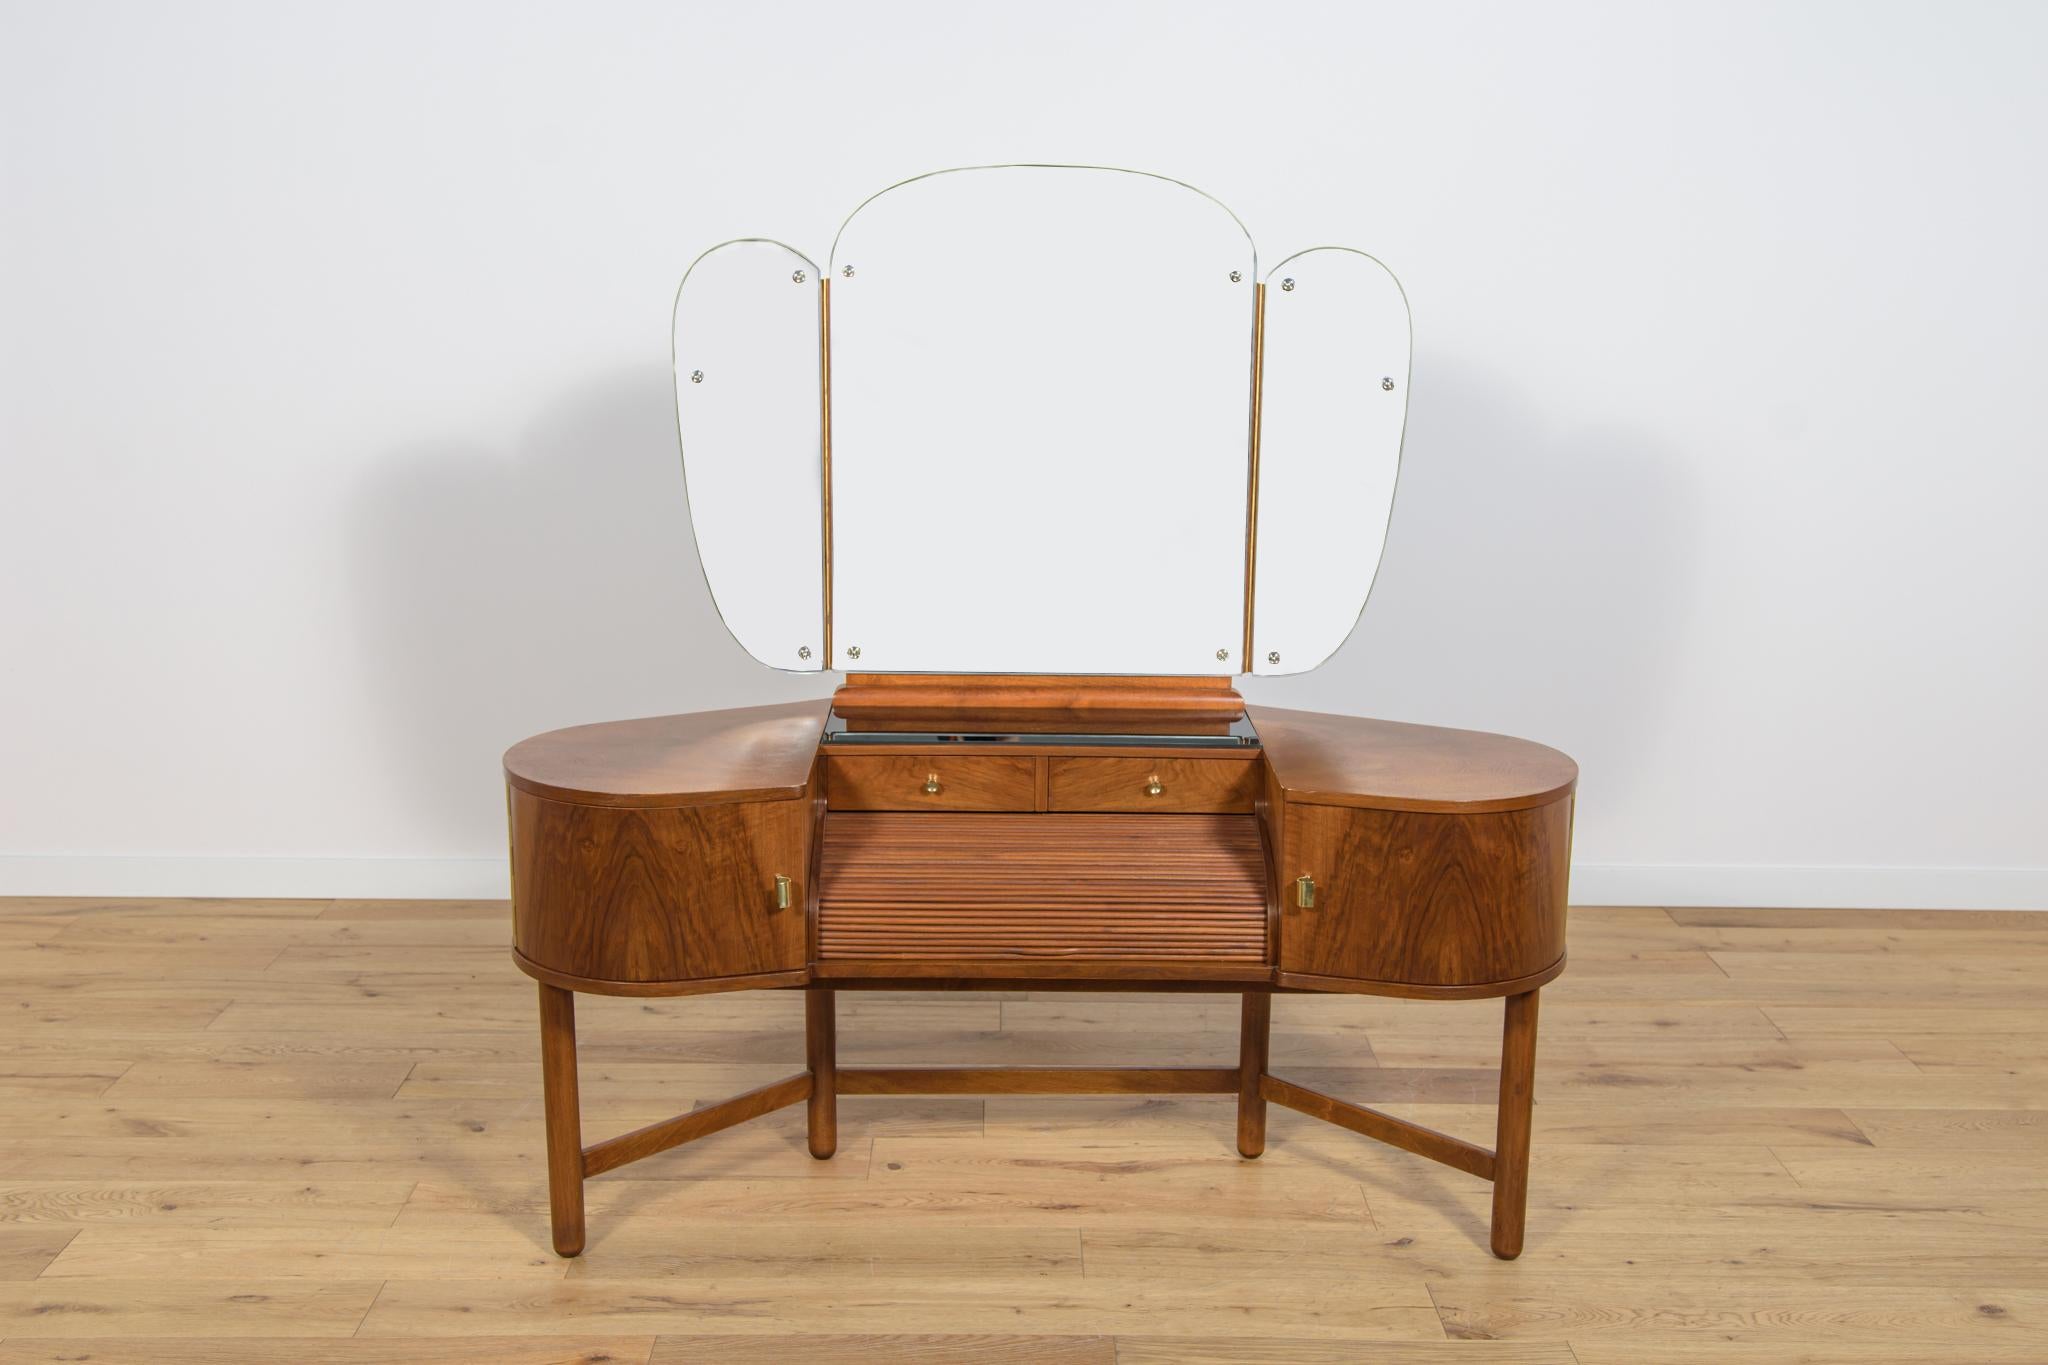  Dressing table in the Art Deco style, made in Denmark in the 1930s. It consists of a central module, closed with a roller shutter, in the part there are two drawers, and on the sides there are two rounded frames. After professional renovation. The